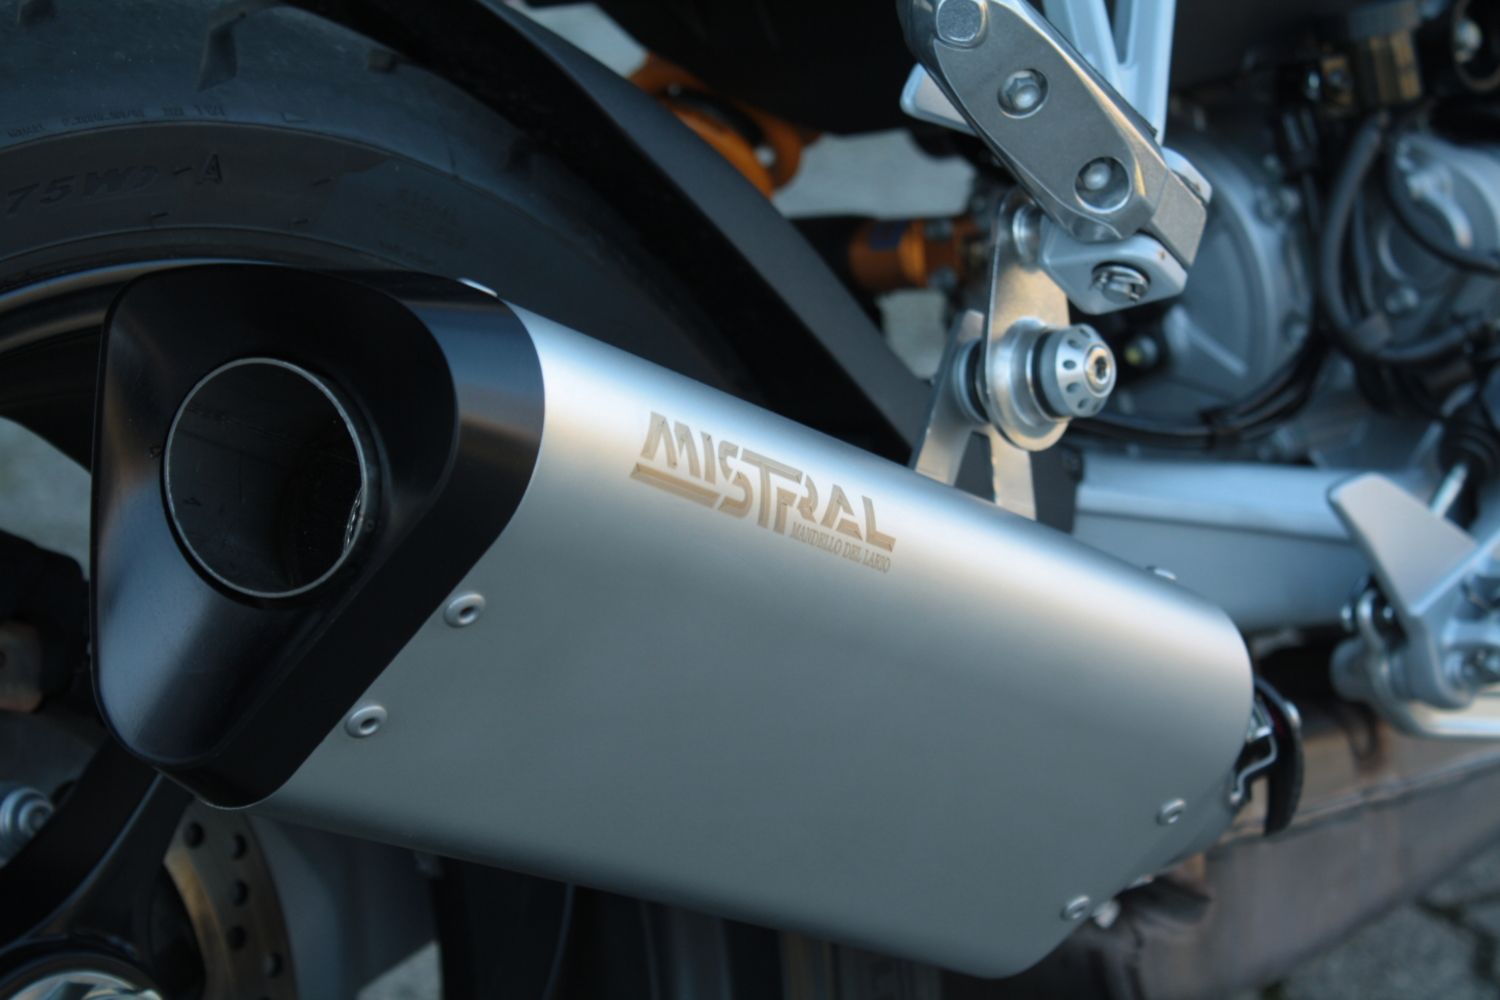 V100 Mandello (S) exhaust by Mistral in black anodized finish